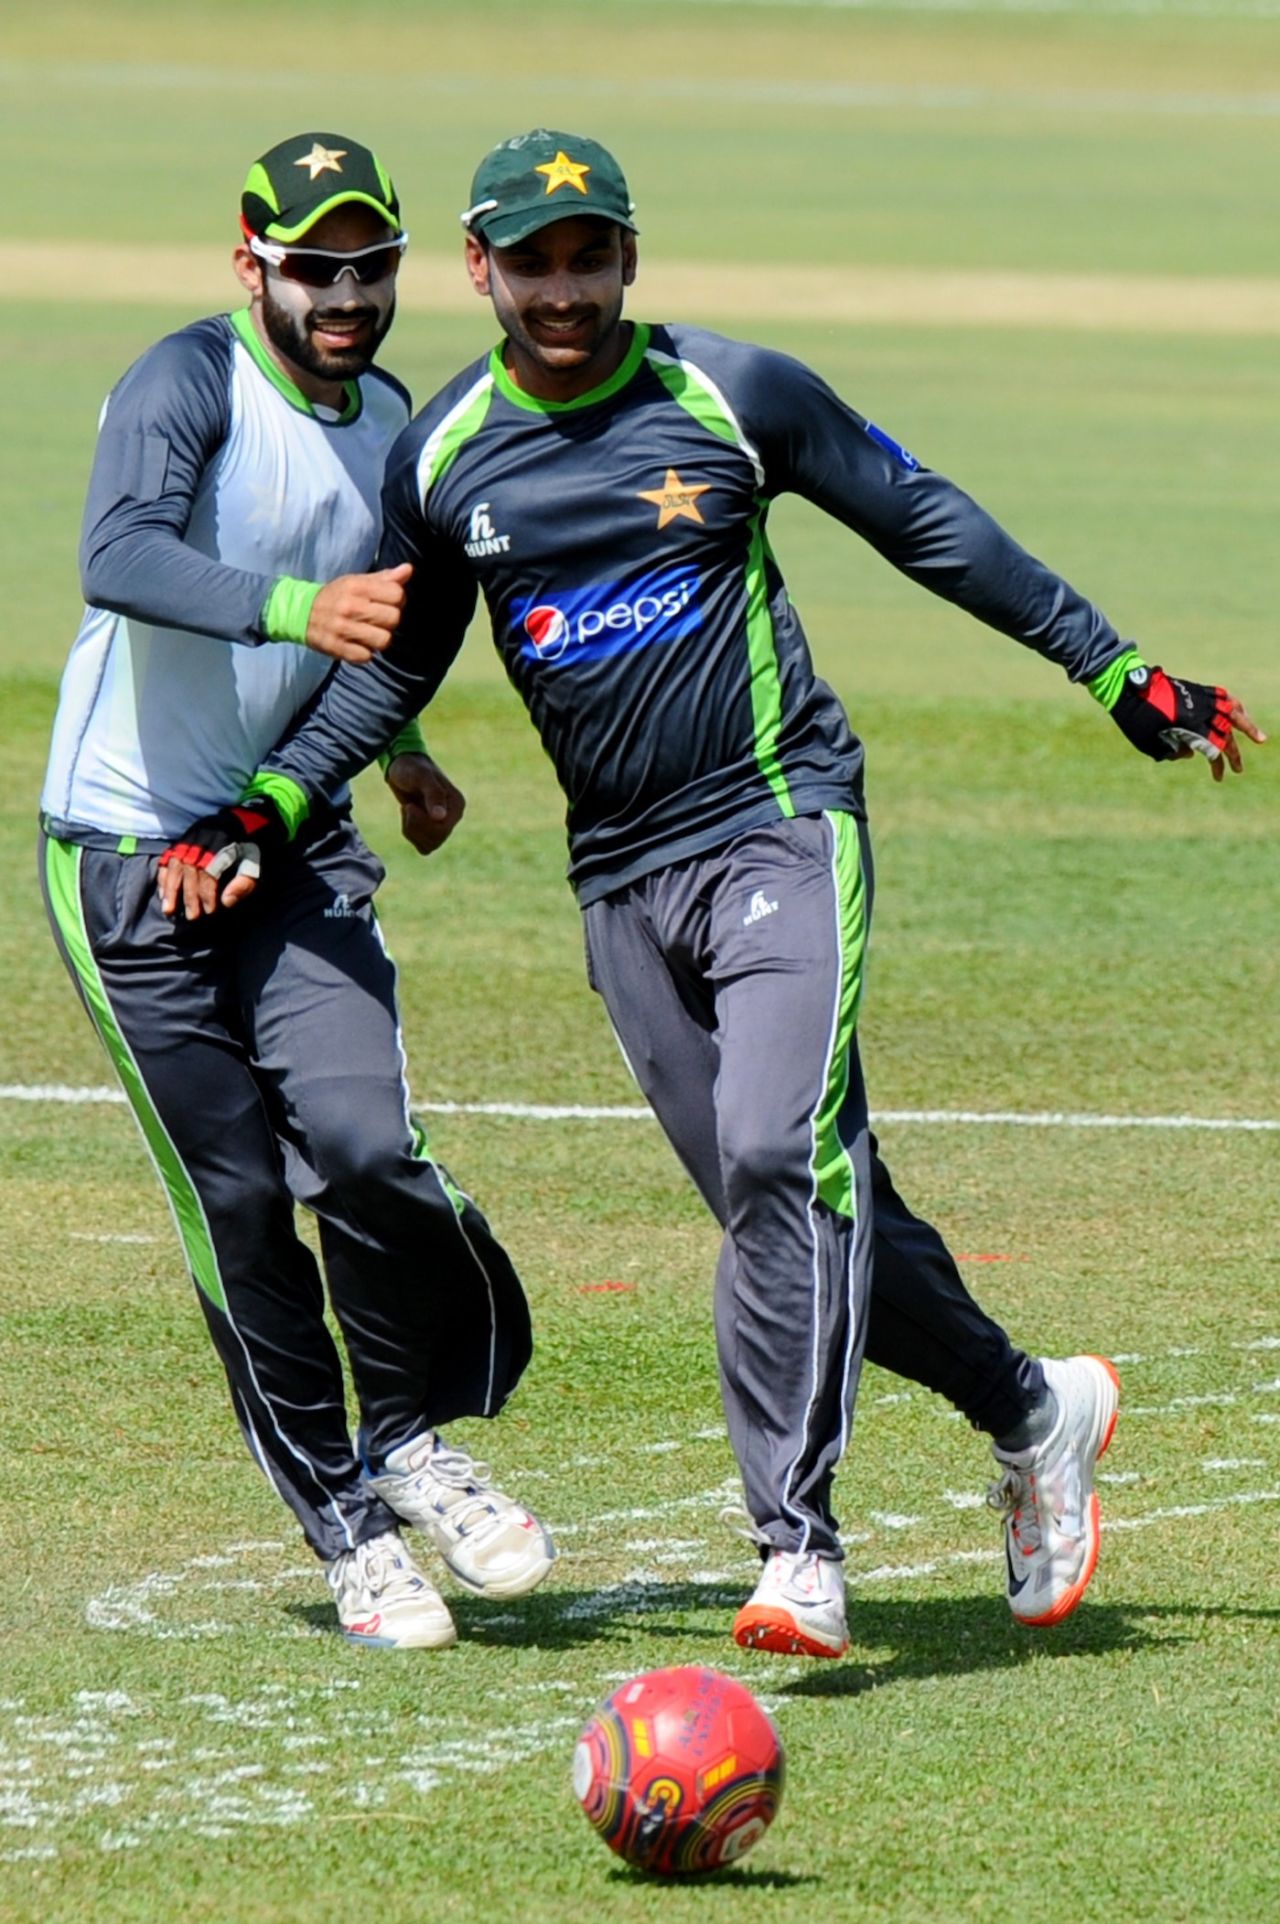 Mohammad Rizwan (left) and Mohammad Hafeez play football during a training session the day before the first ODI againstSri Lanka, Dambulla, July 10, 2015